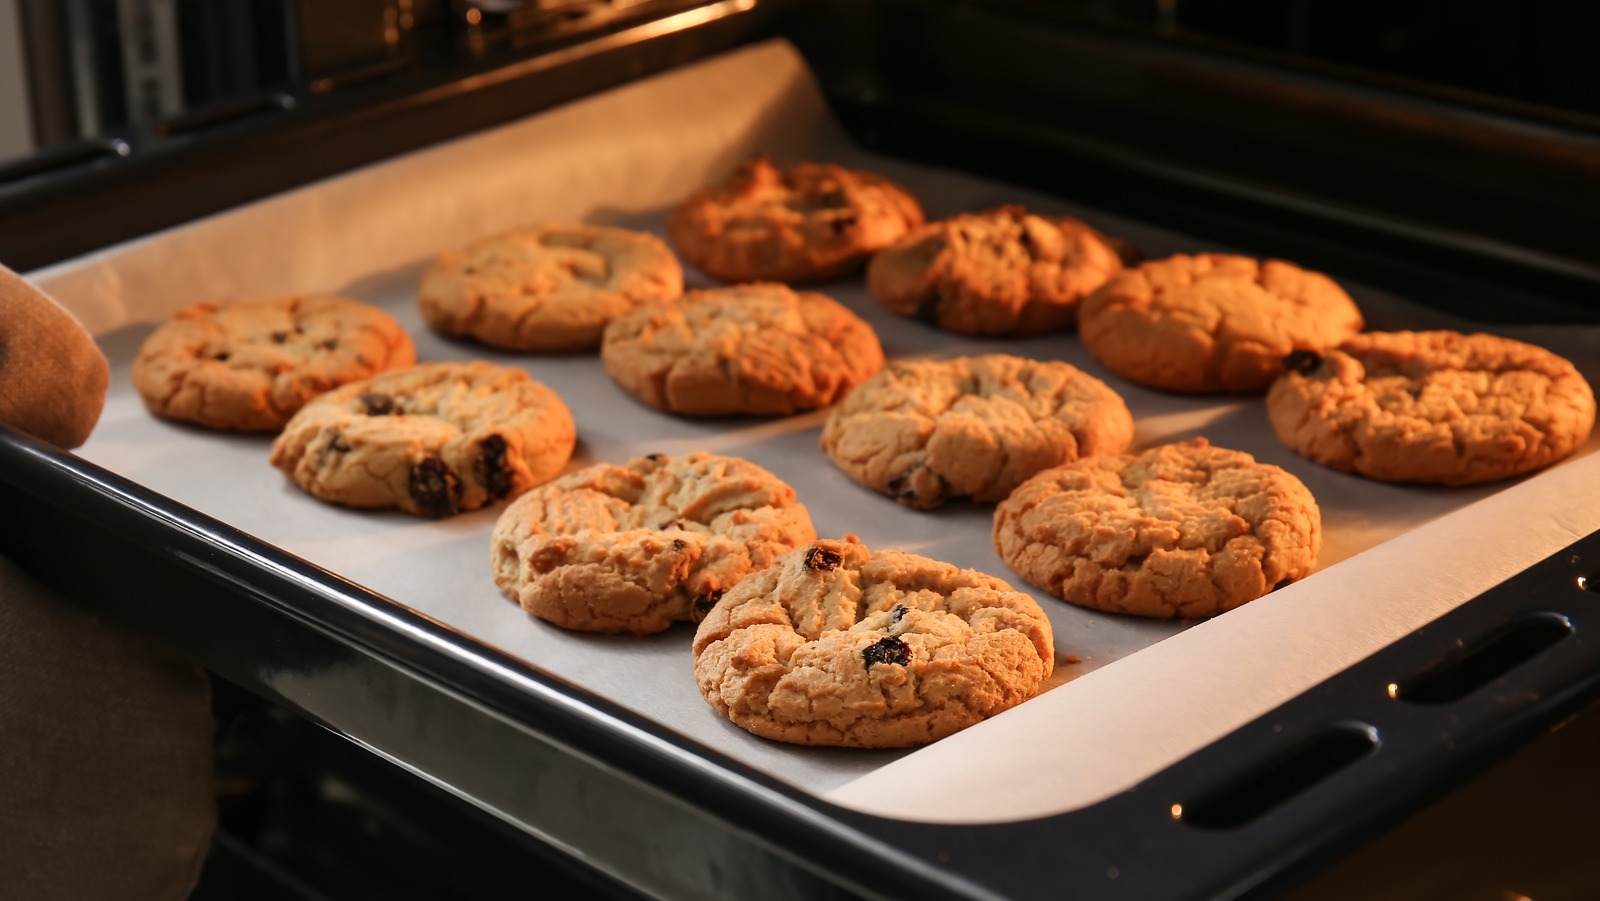 The BEST baking trays and cookie sheets for baking cookies.